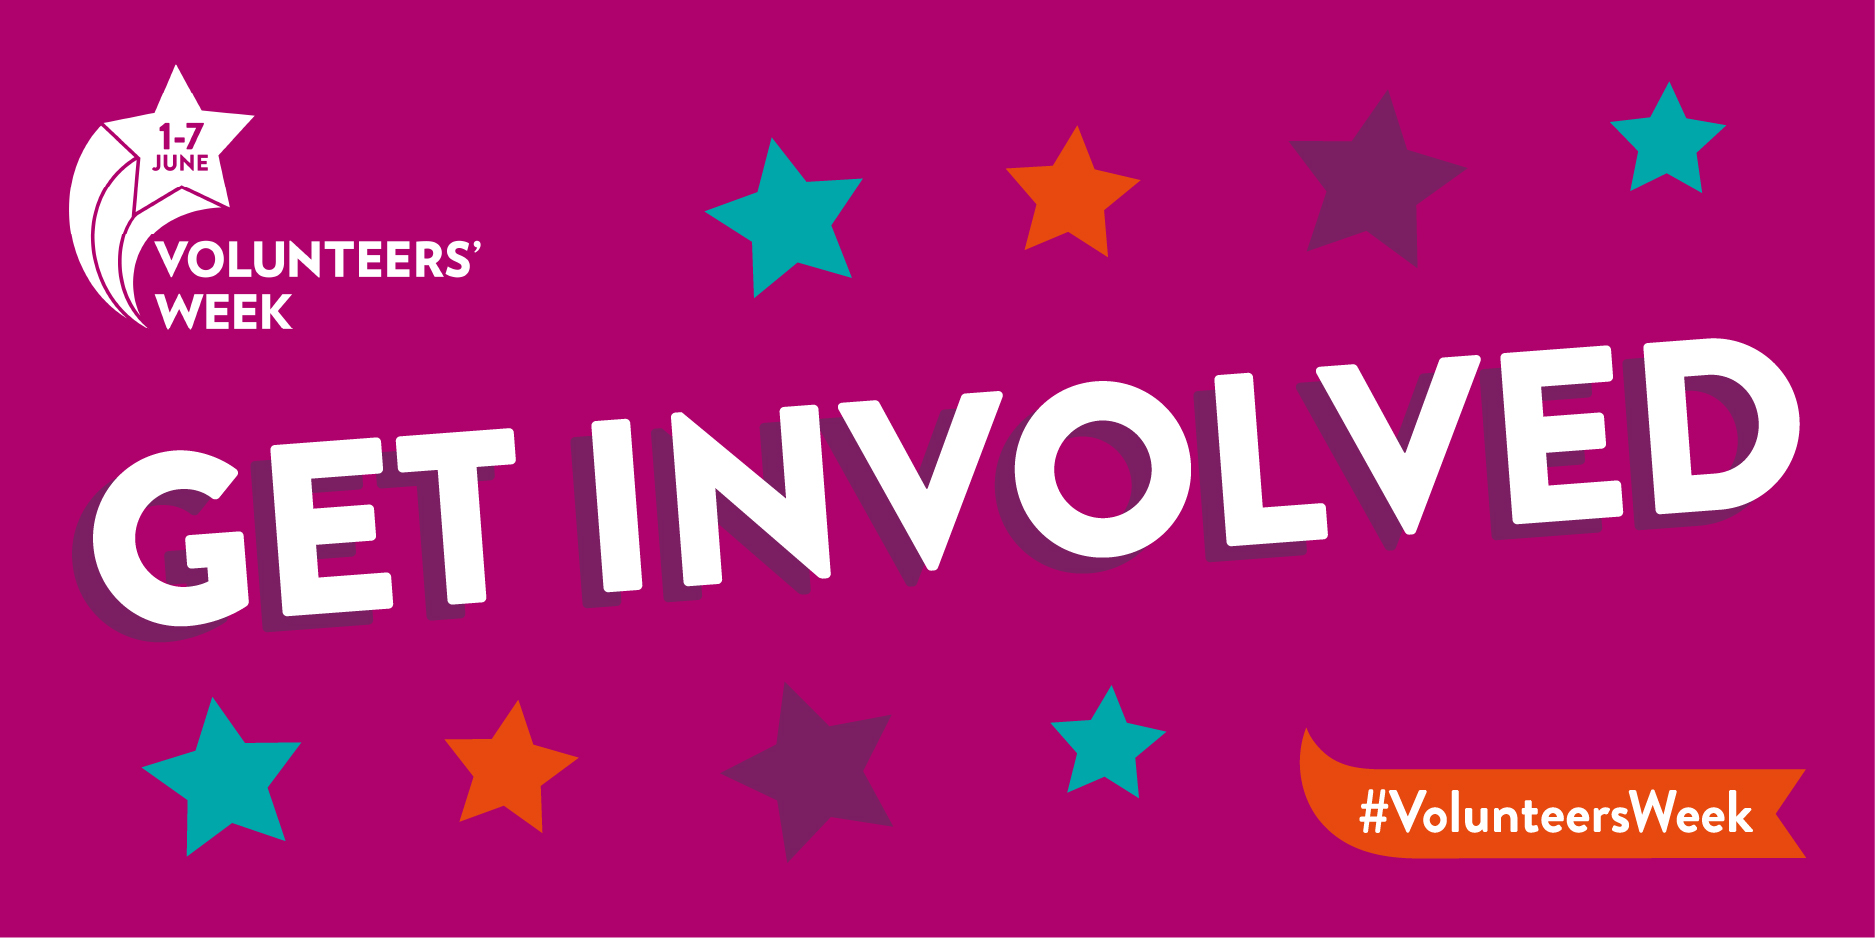 A purple background with colourful stars with the words GET INVOLVED running across the image. Volunteers week logo of a shooting star is in the corner and #VolunteersWeek